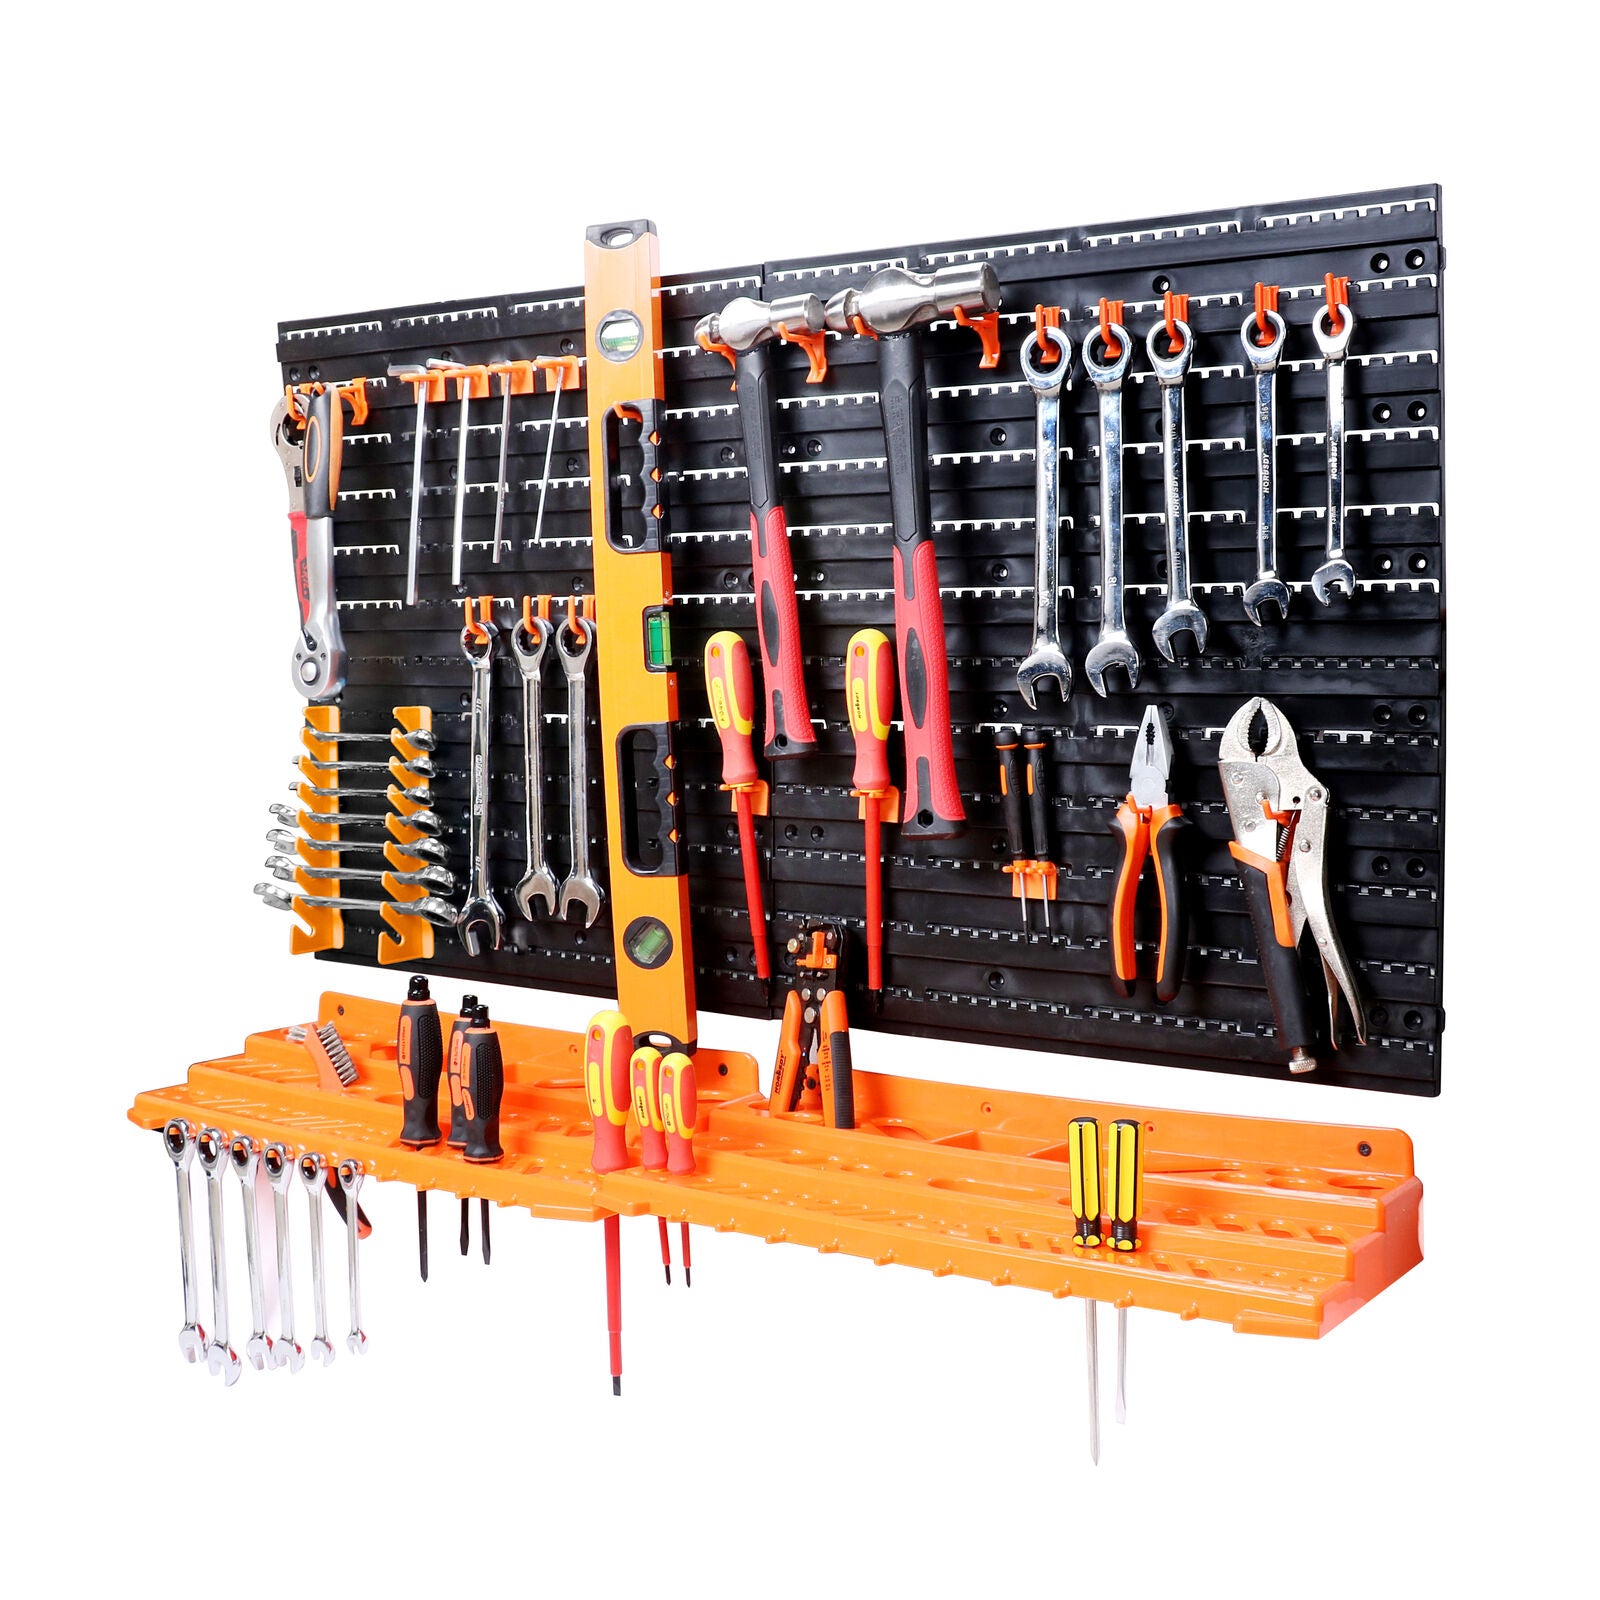 Complete 52-Piece Wall Mounted Tool Storage Rack Kit - Includes Boards, Shelves, Spanner Holders, and Hooks for Organizing Tools